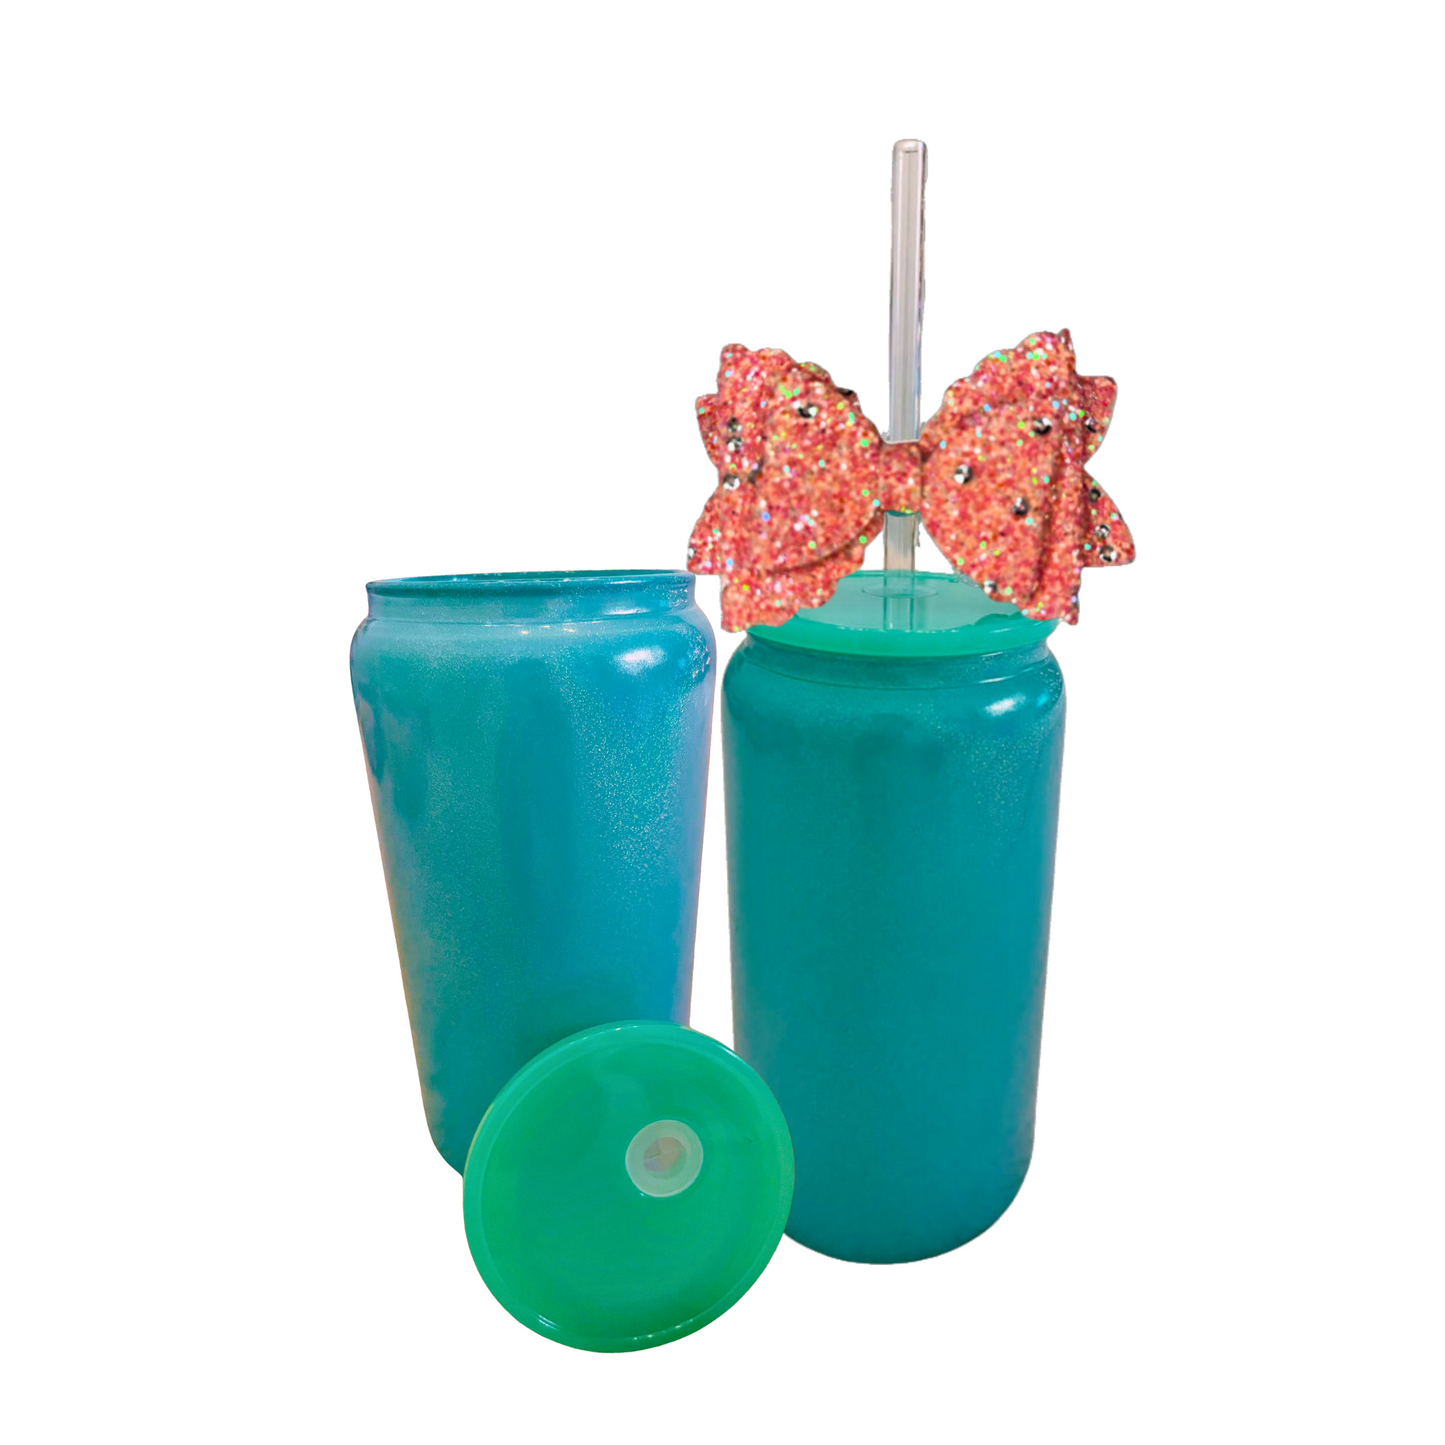 Green Glass Can with Lid, Straws, and Bow - 16 oz Glass Drinking Cup, Ice Glass Coffee Cup, Tumbler Drinking Glasses